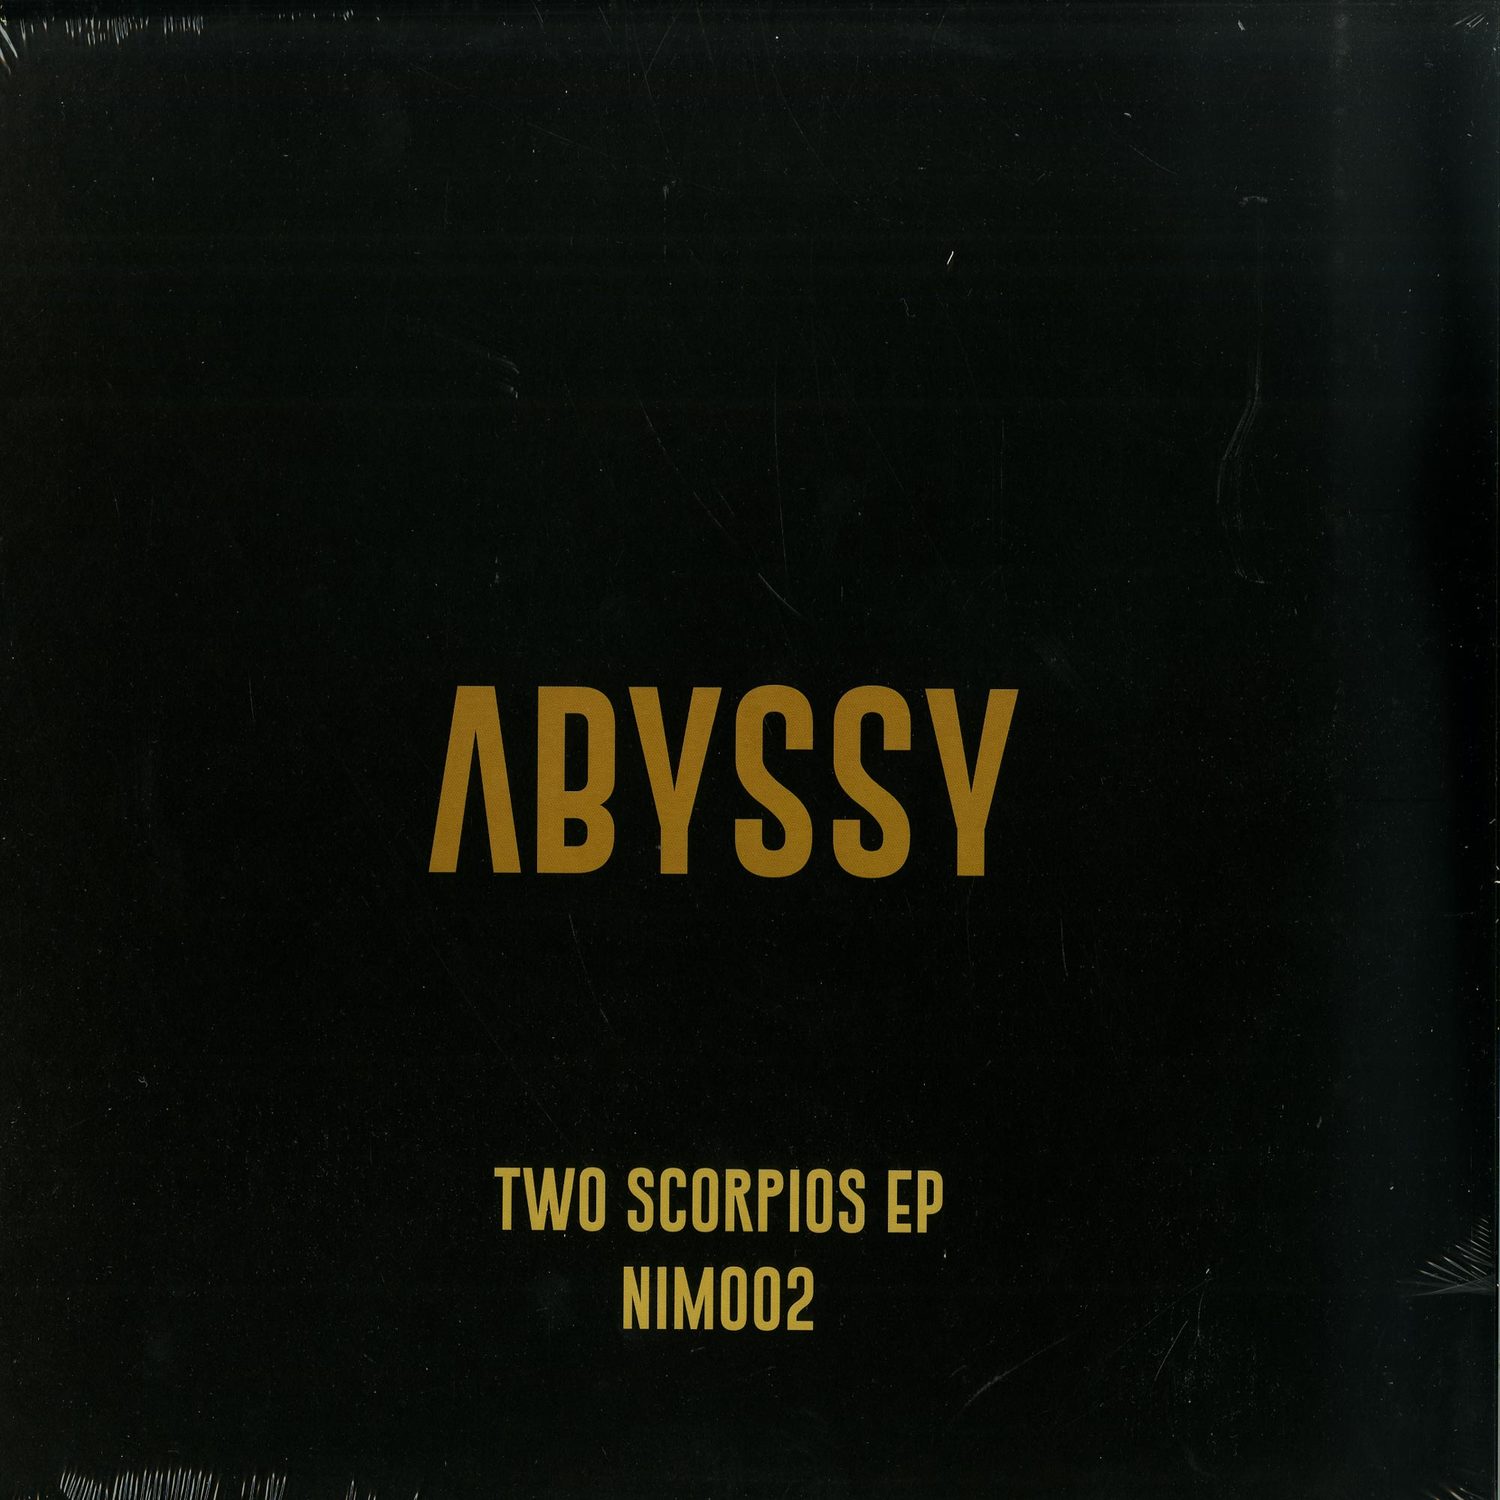 Abyssy - TWO SCORPIOS EP